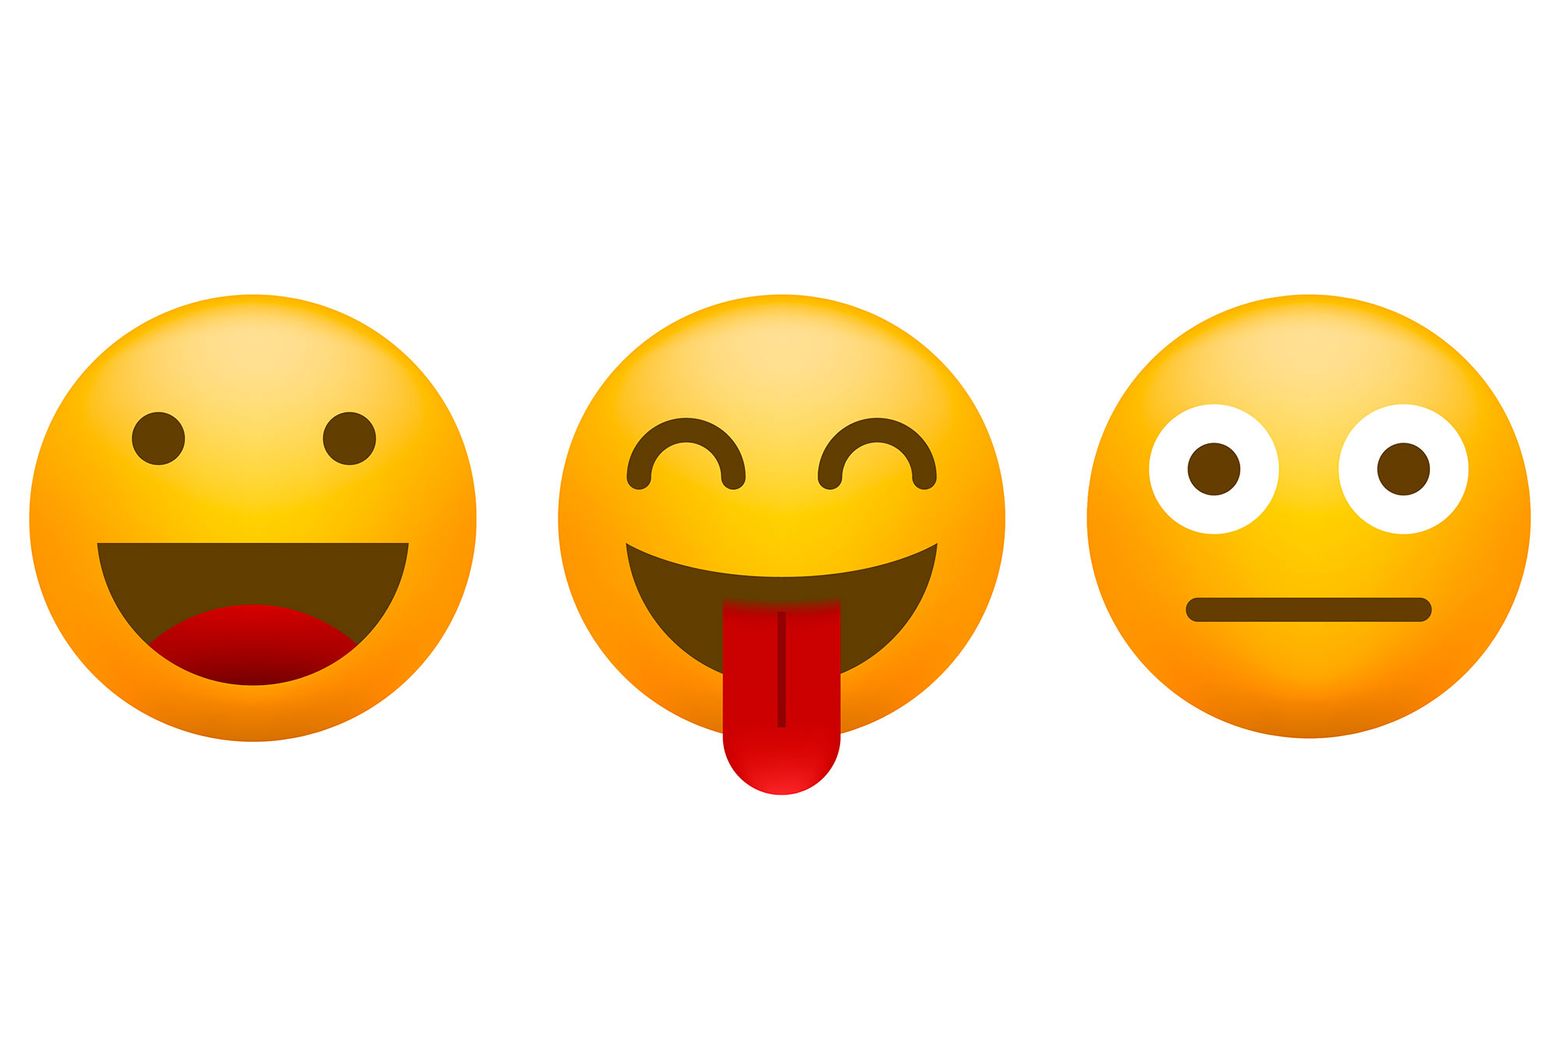 How to use emoji at work